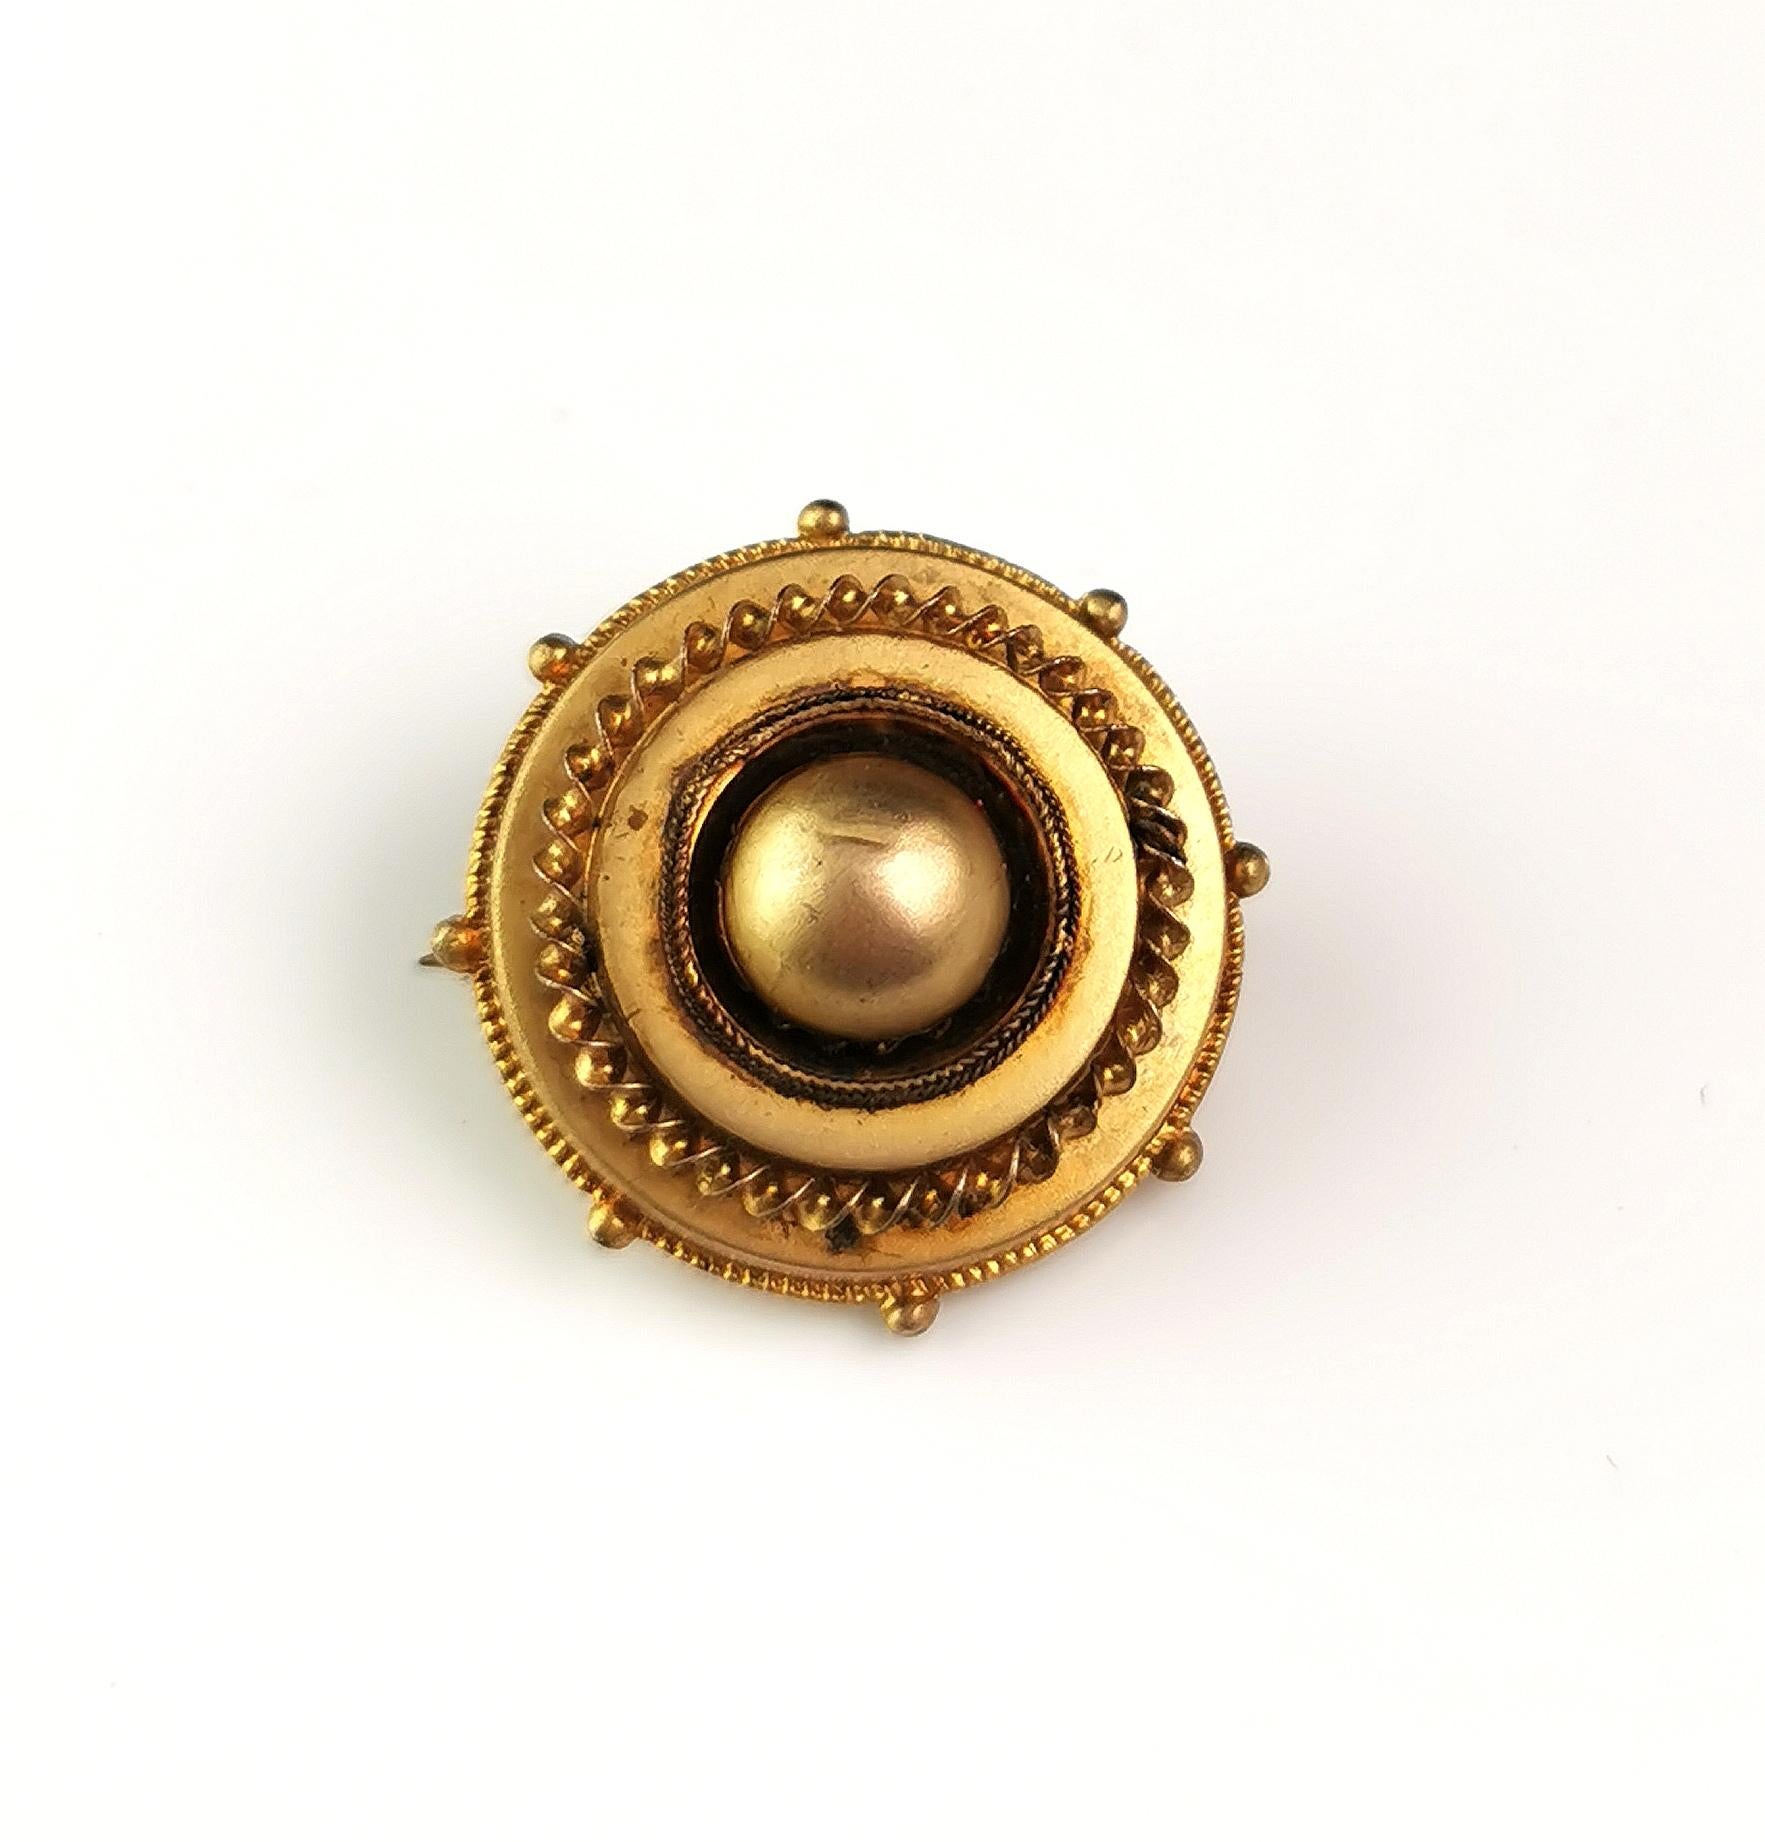 An attractive antique Victorian era gilt mourning brooch.

Designed in the target style it is crafted in a rich golden gilt metal with a lightly domed front and beading around the outer rim.

To the reverse there is a locket compartment enclosing a